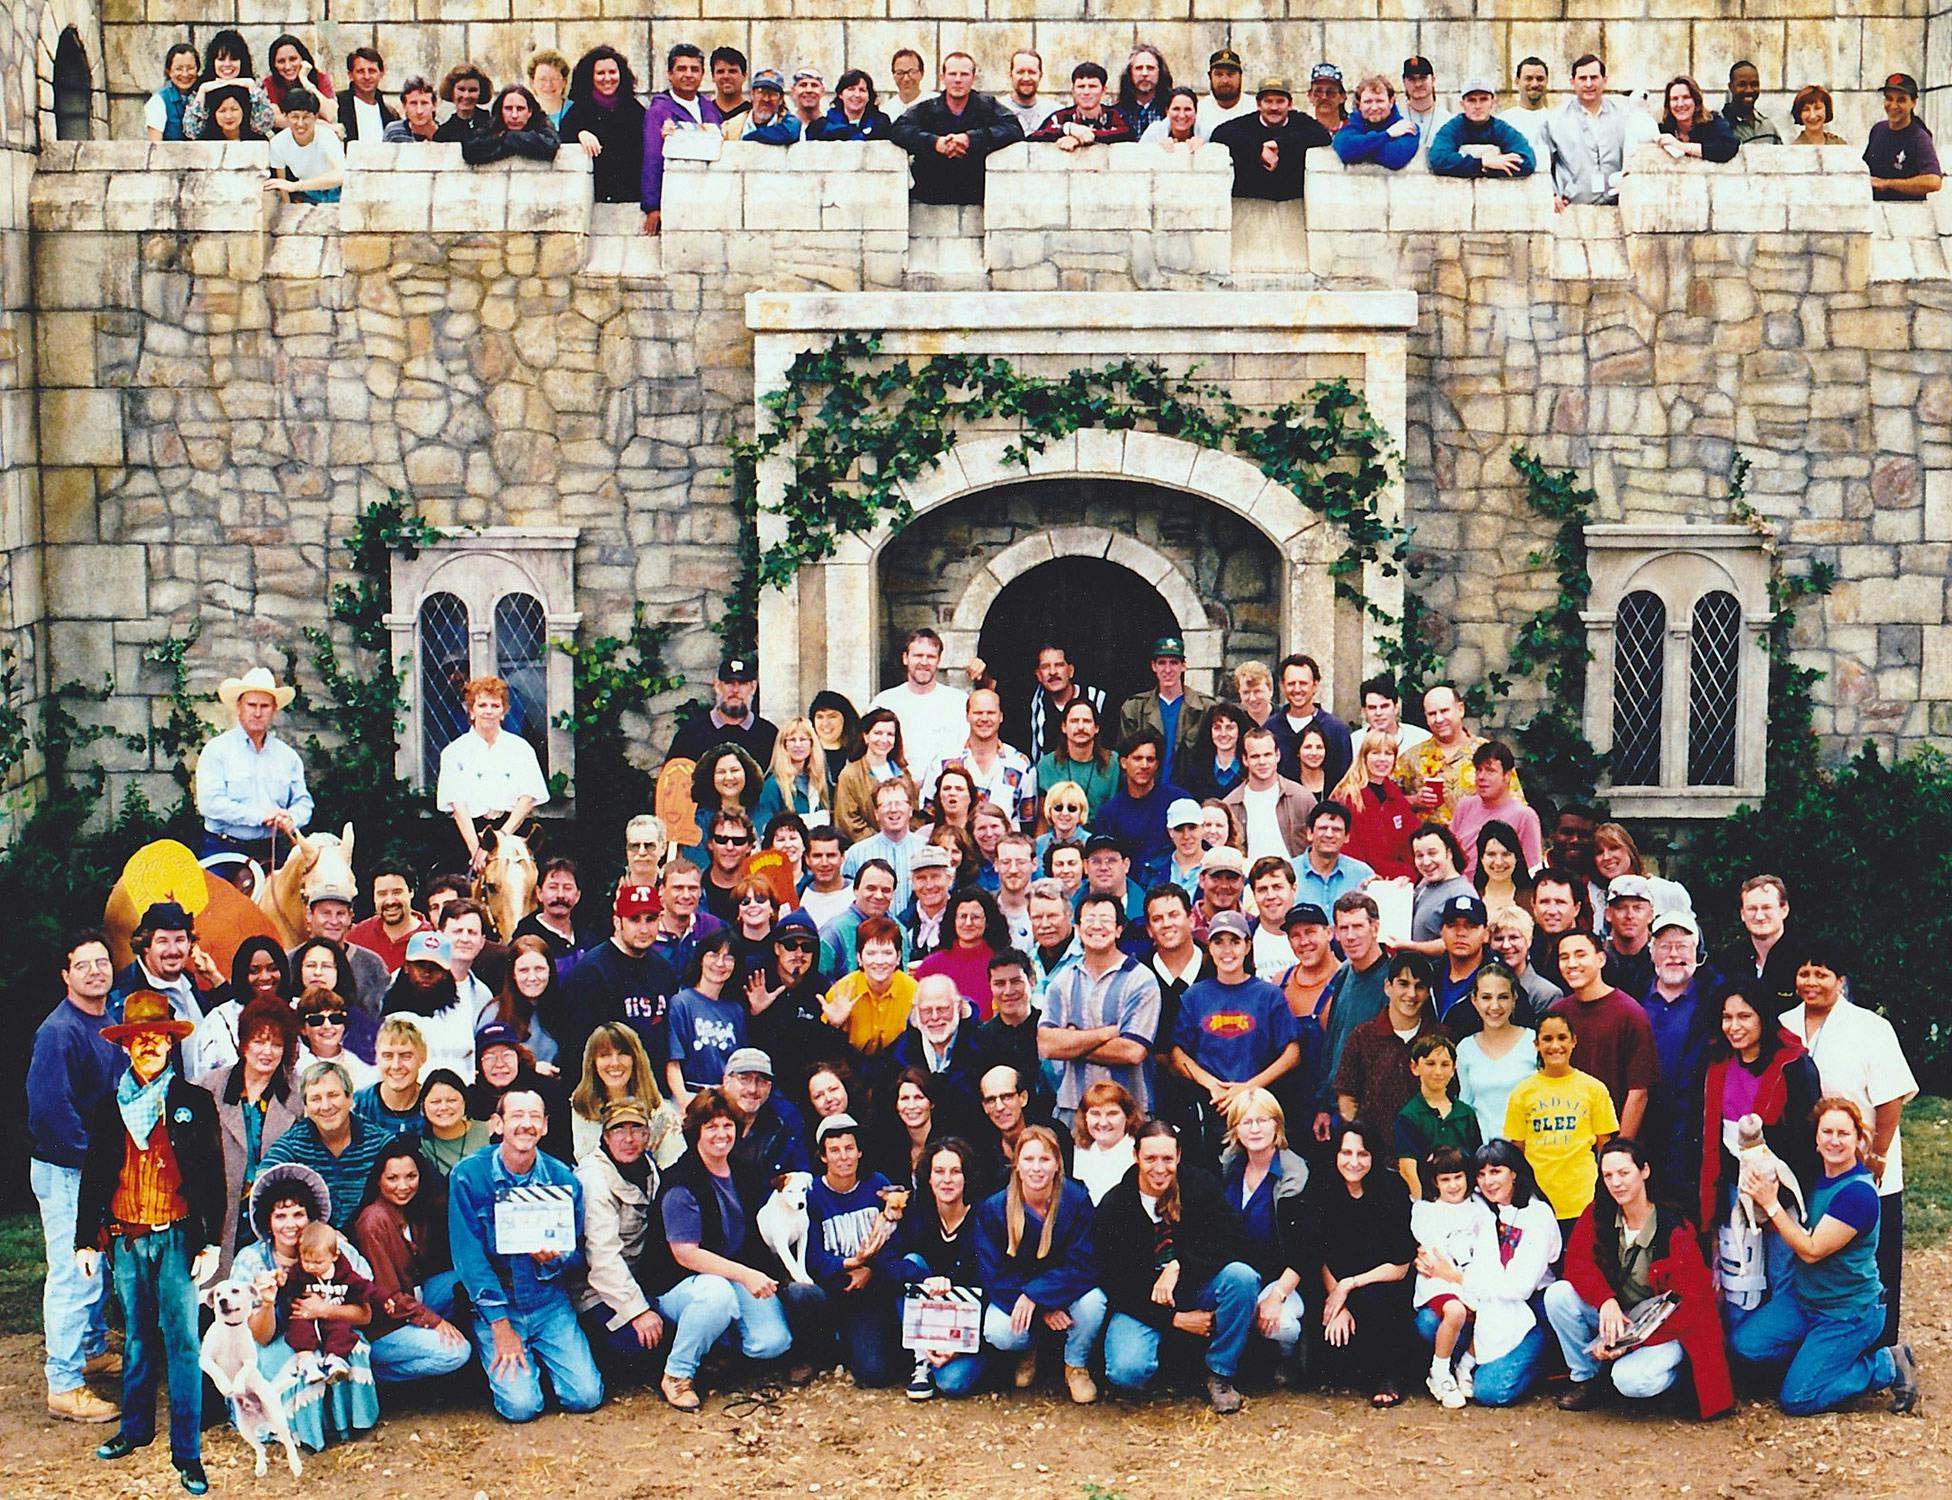 Cast and crew pose together at the end of Season 2 